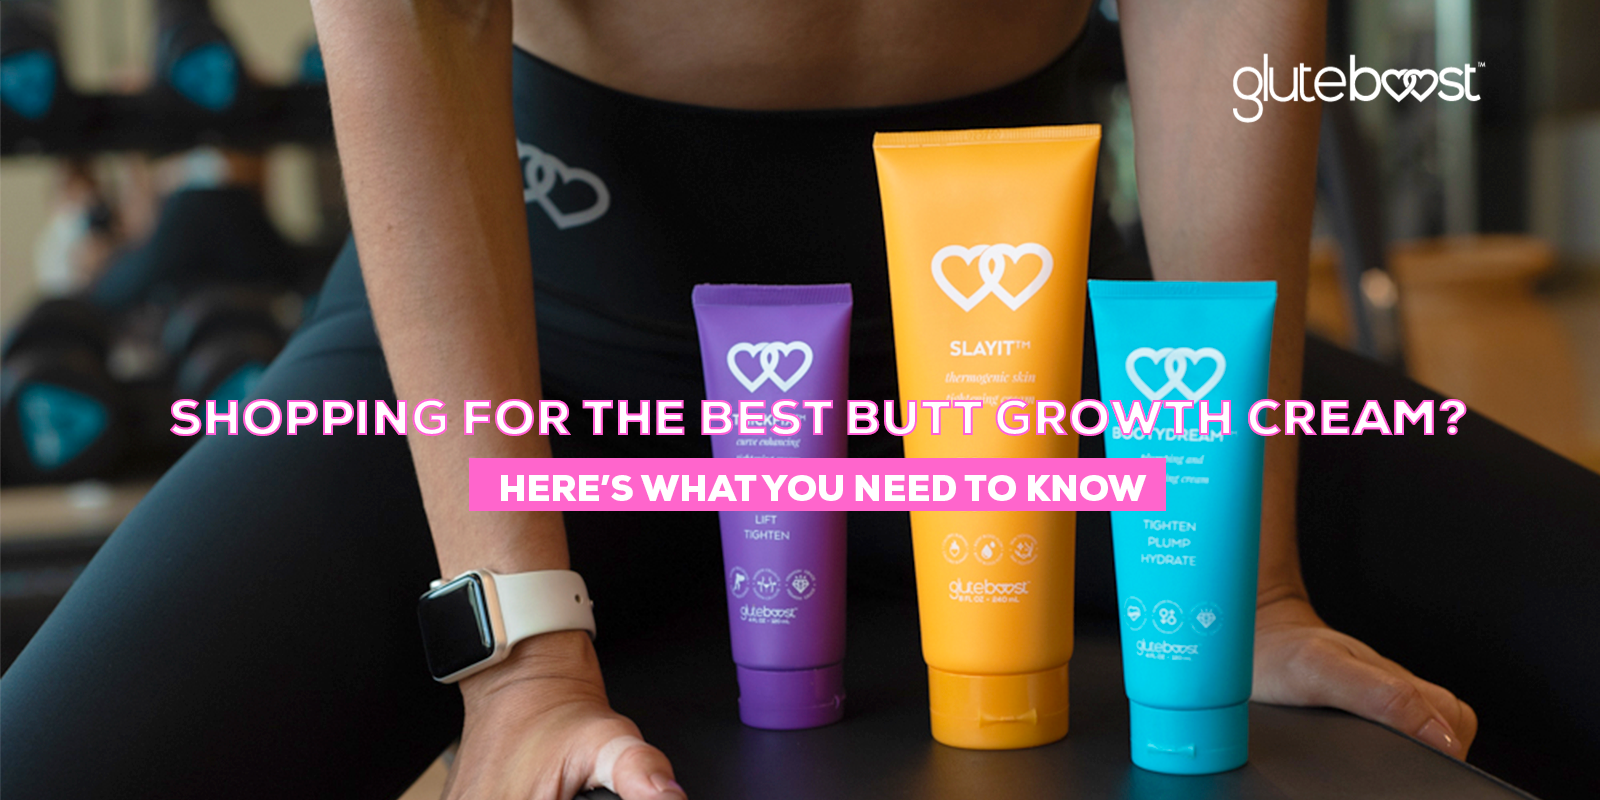 Shopping for the Best Butt Growth Cream? Here’s What You Need to Know